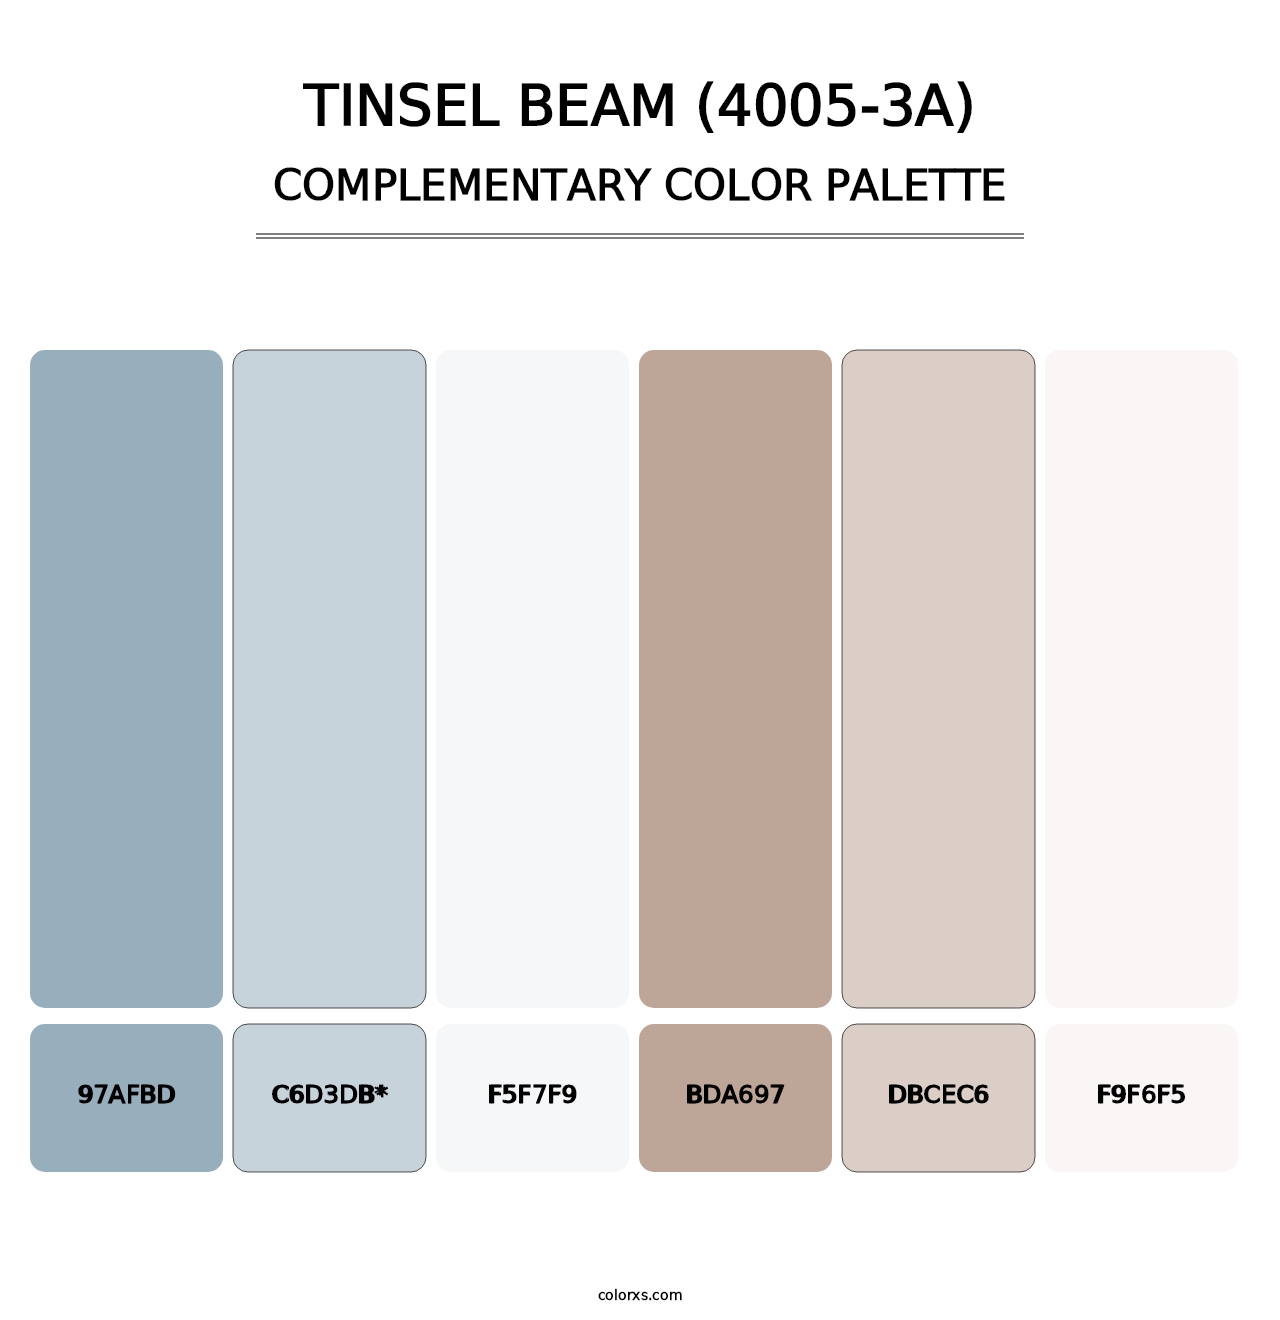 Tinsel Beam (4005-3A) - Complementary Color Palette